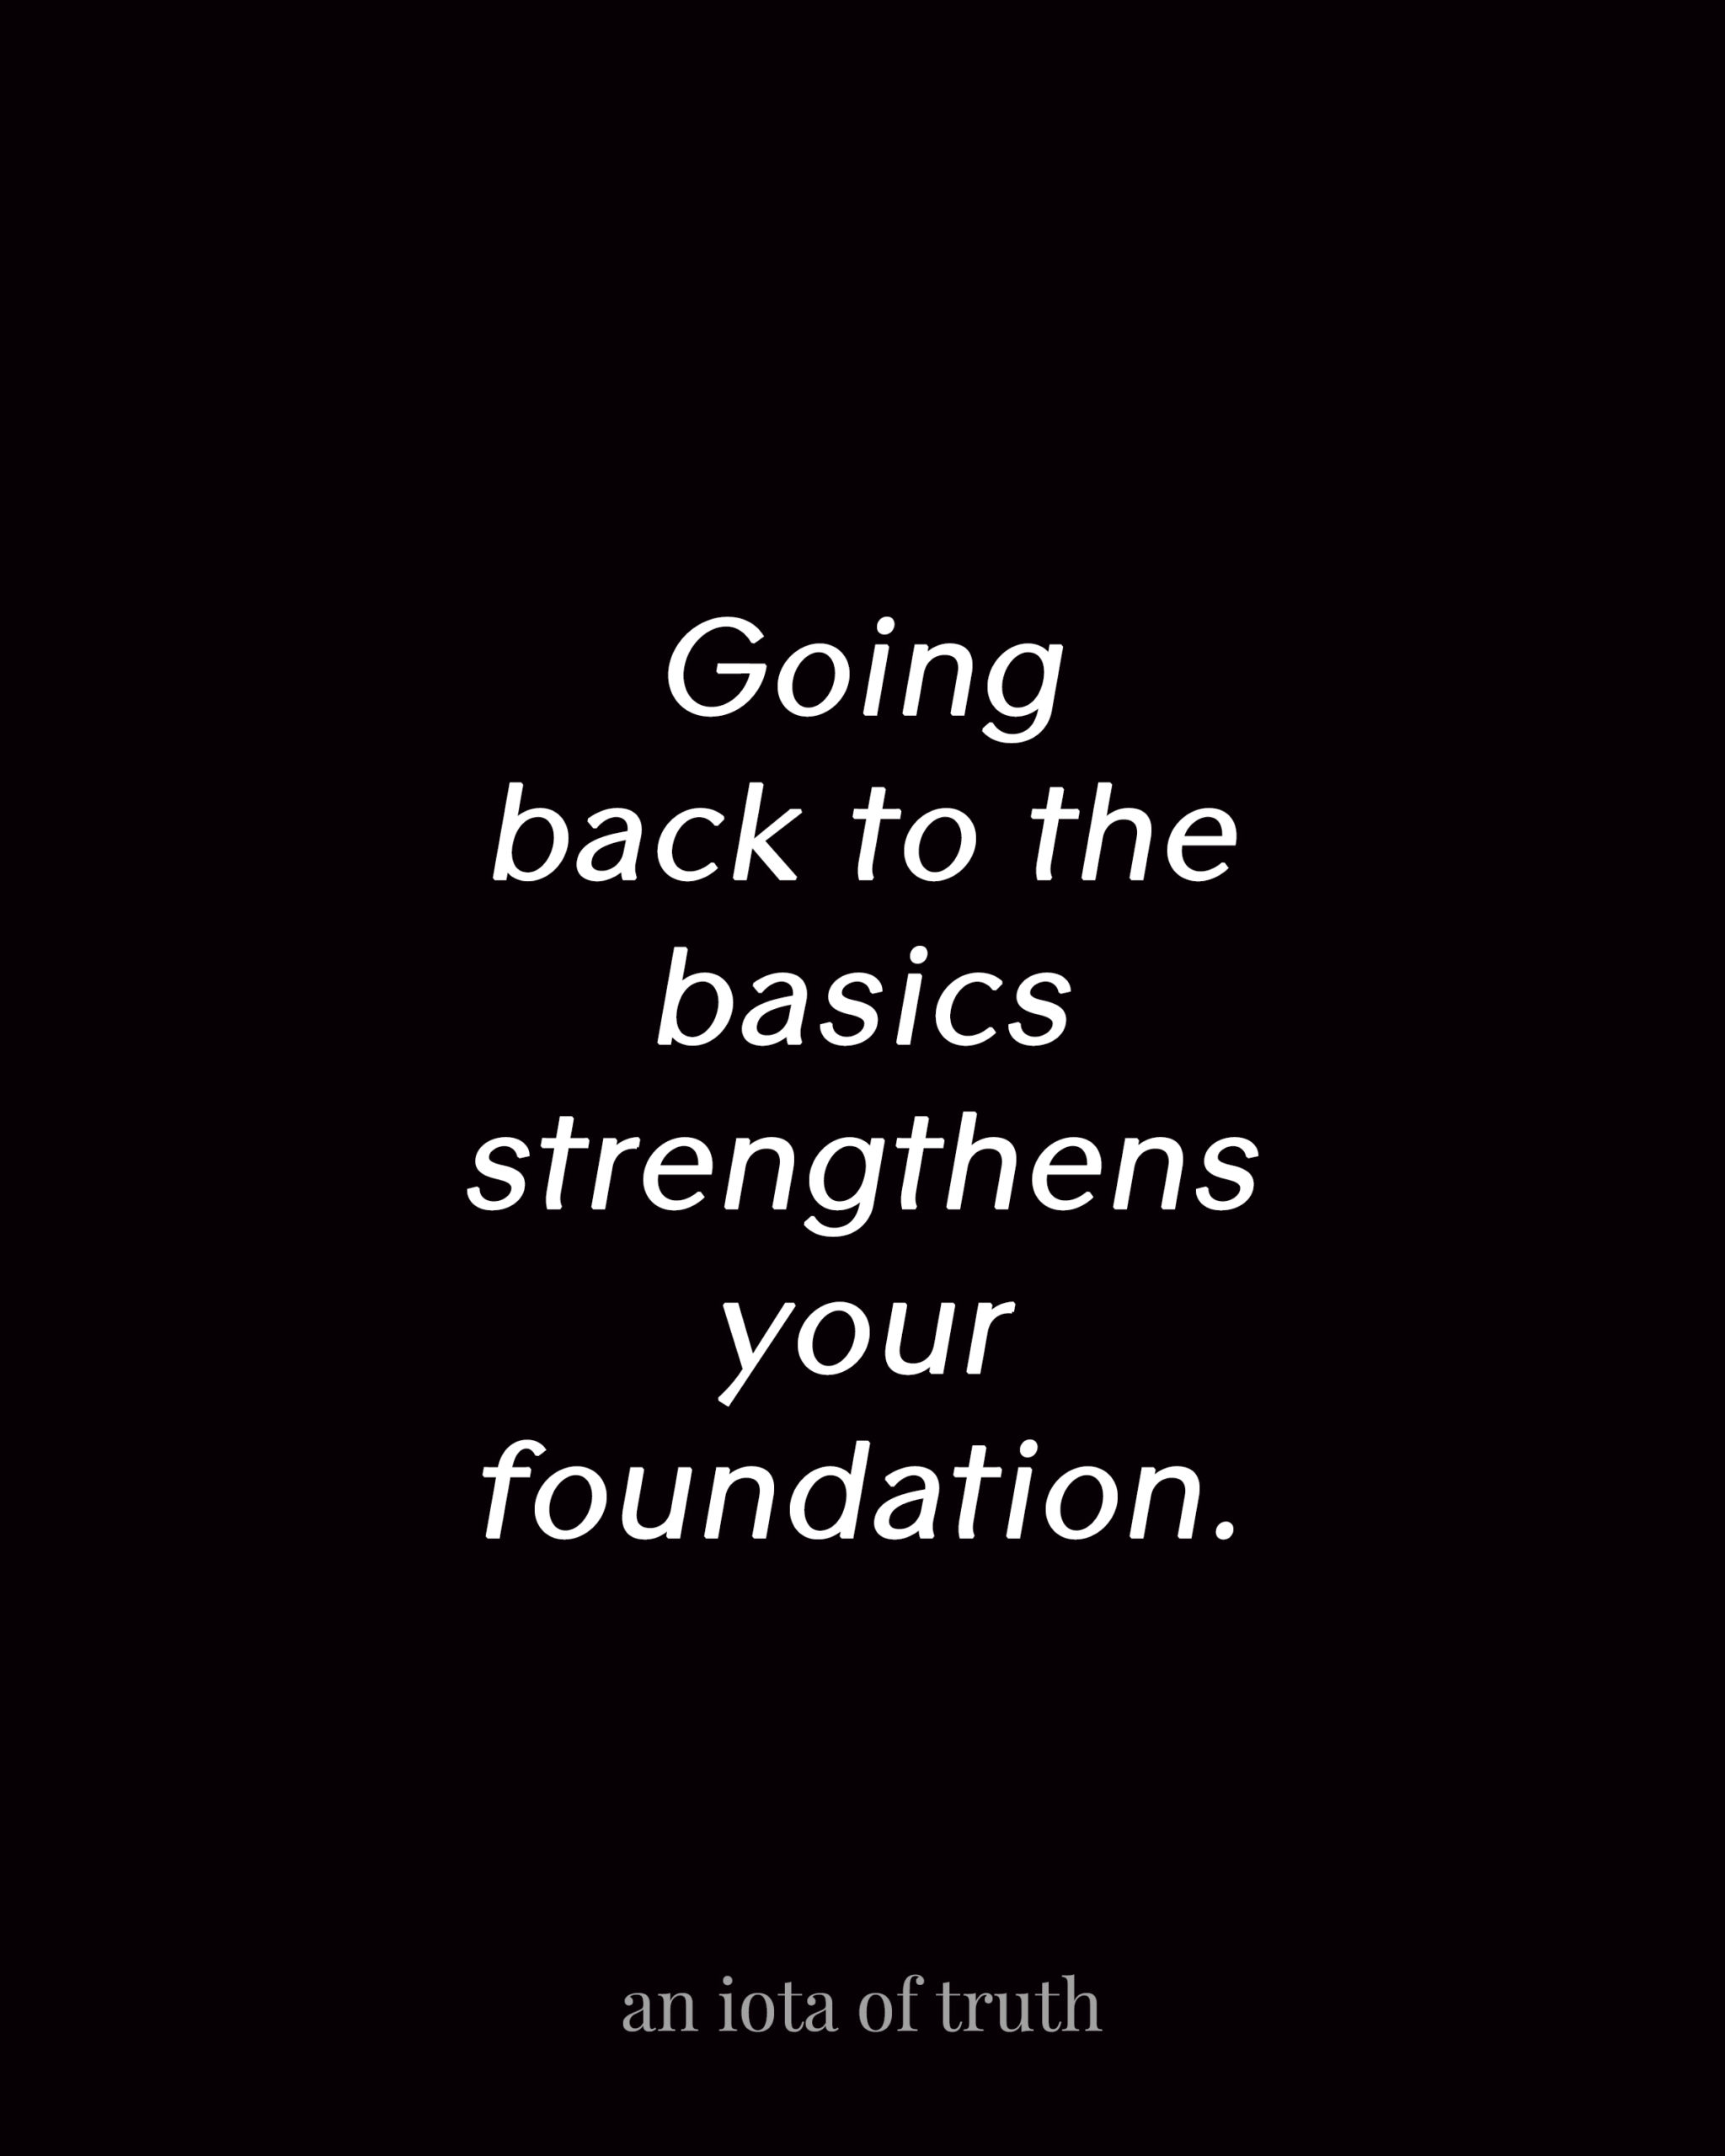 Going back to the basics strengthens your foundation.